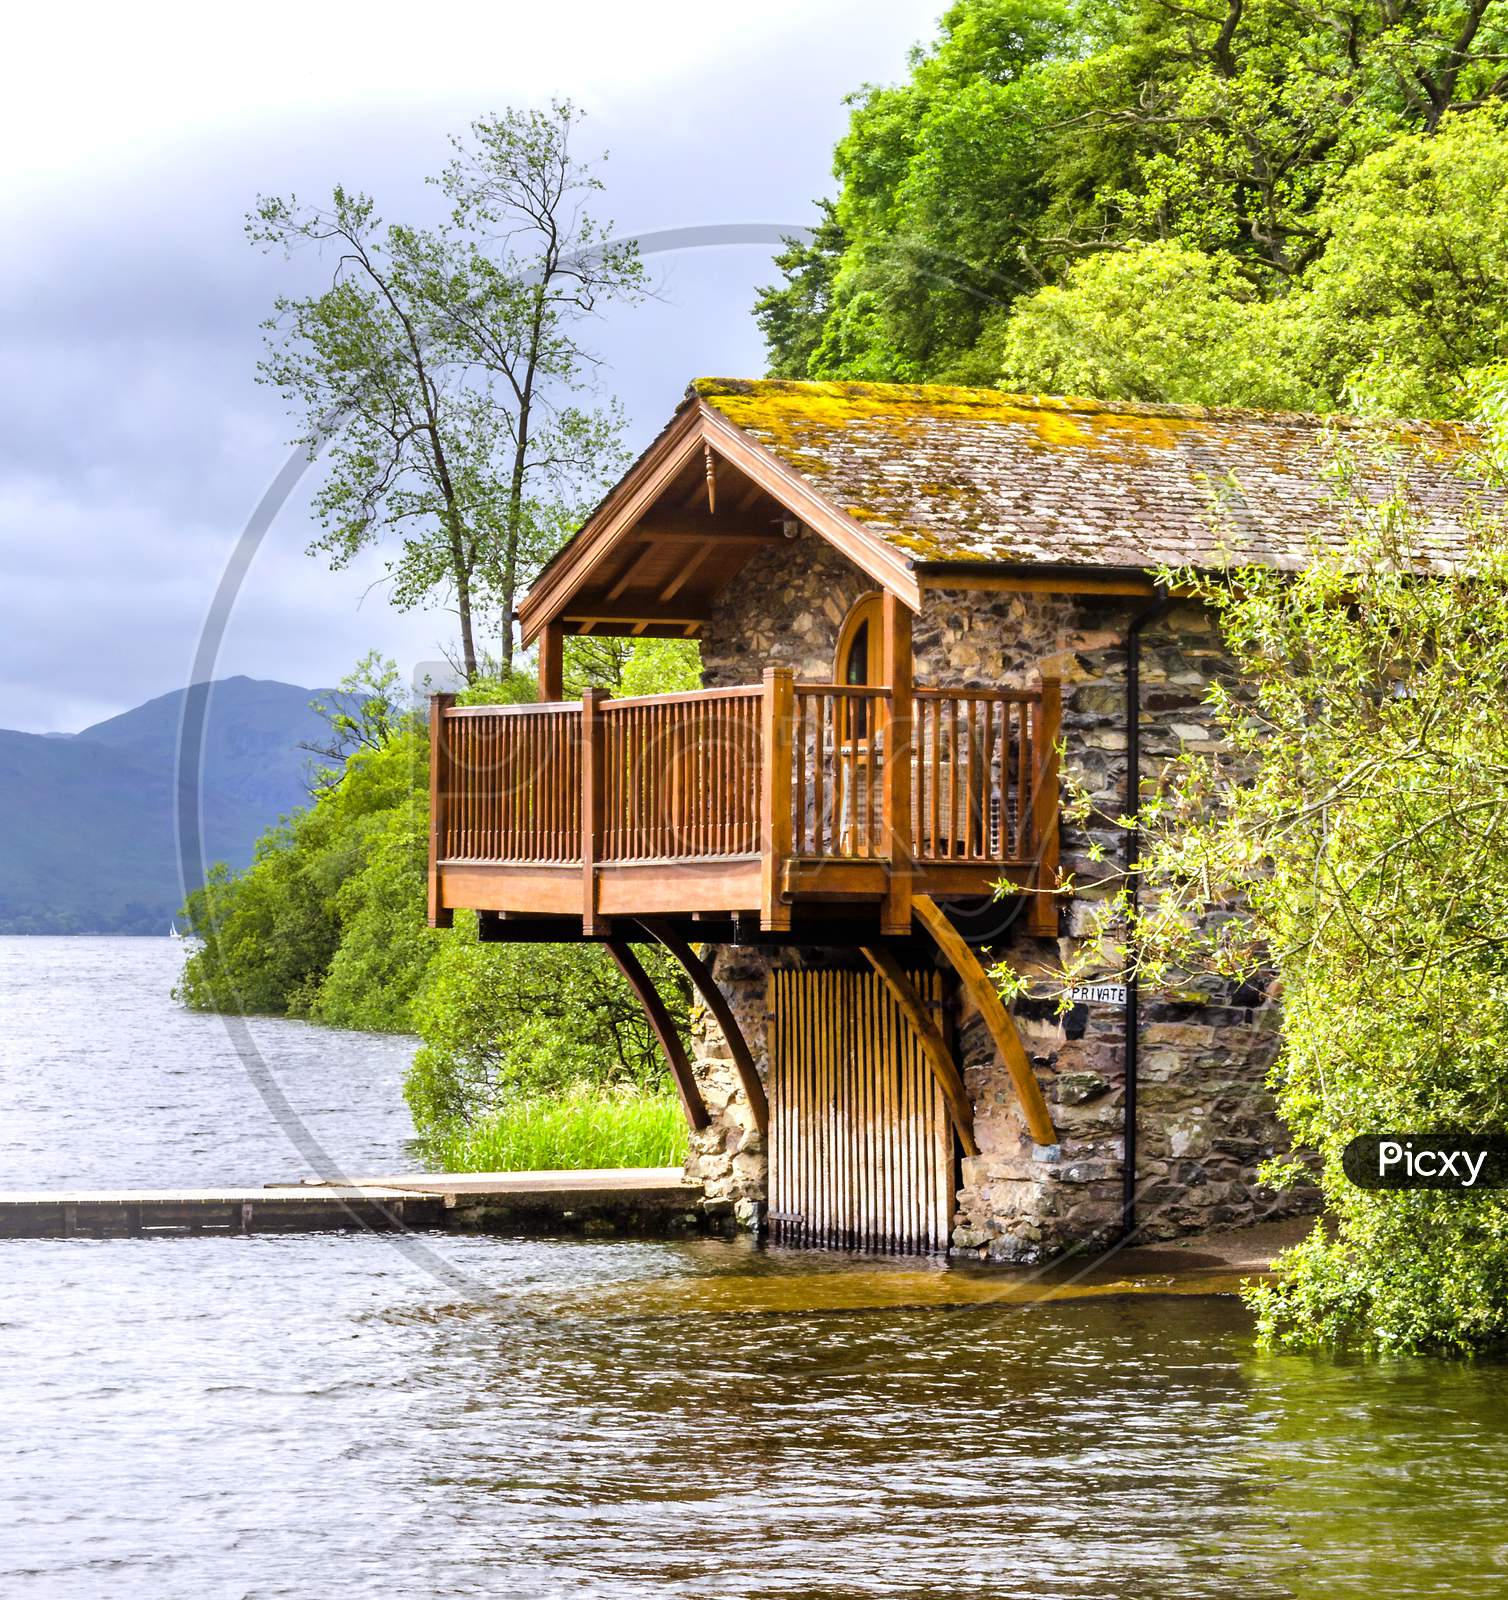 Editorial Ullswater Penrith Cumbria 13 June 2017 The boat house on the banks of Ullswater.